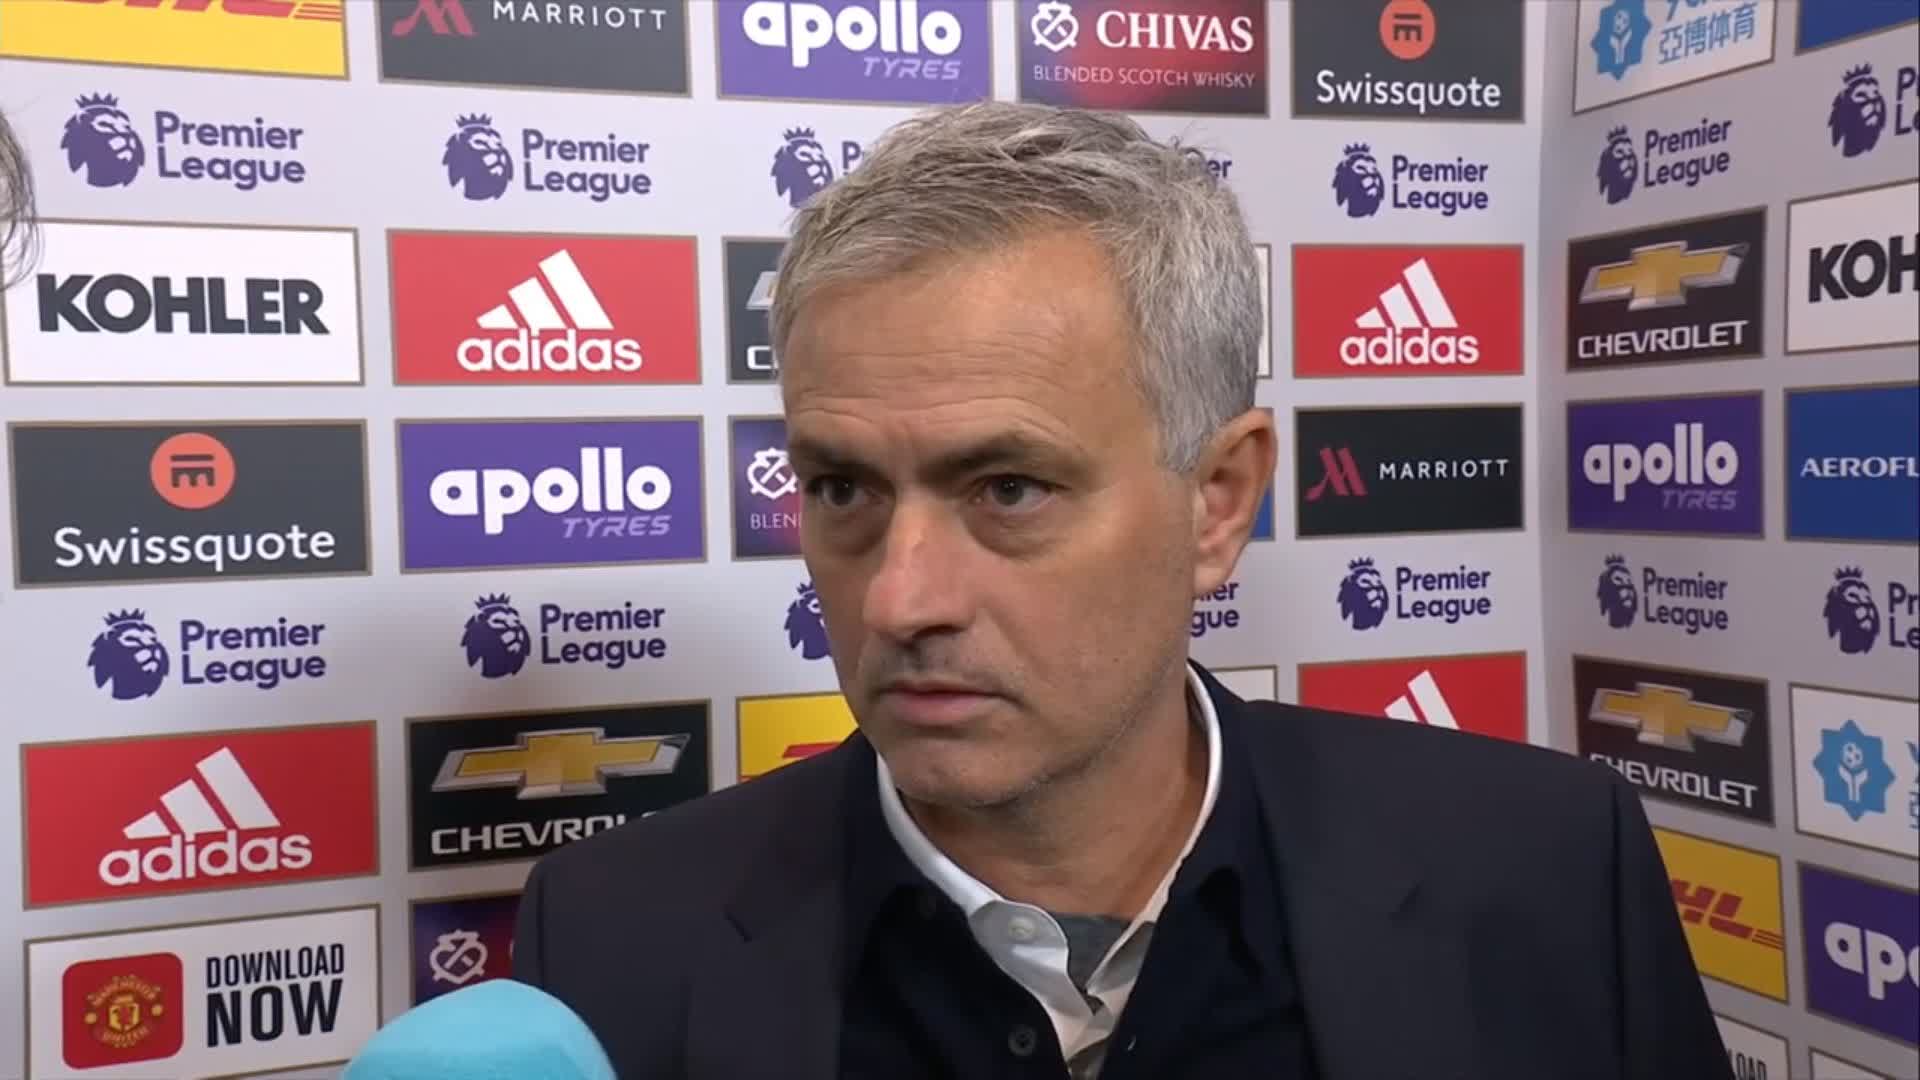 ingeniørarbejde Måned Frigøre Viaplay Sports UK on Twitter: "⚪ Jose Mourinho lamented a slow start for  Spurs tonight, admitting Manchester United grabbed the initiative in the  first half 🗣 "They started more aggressive, they started